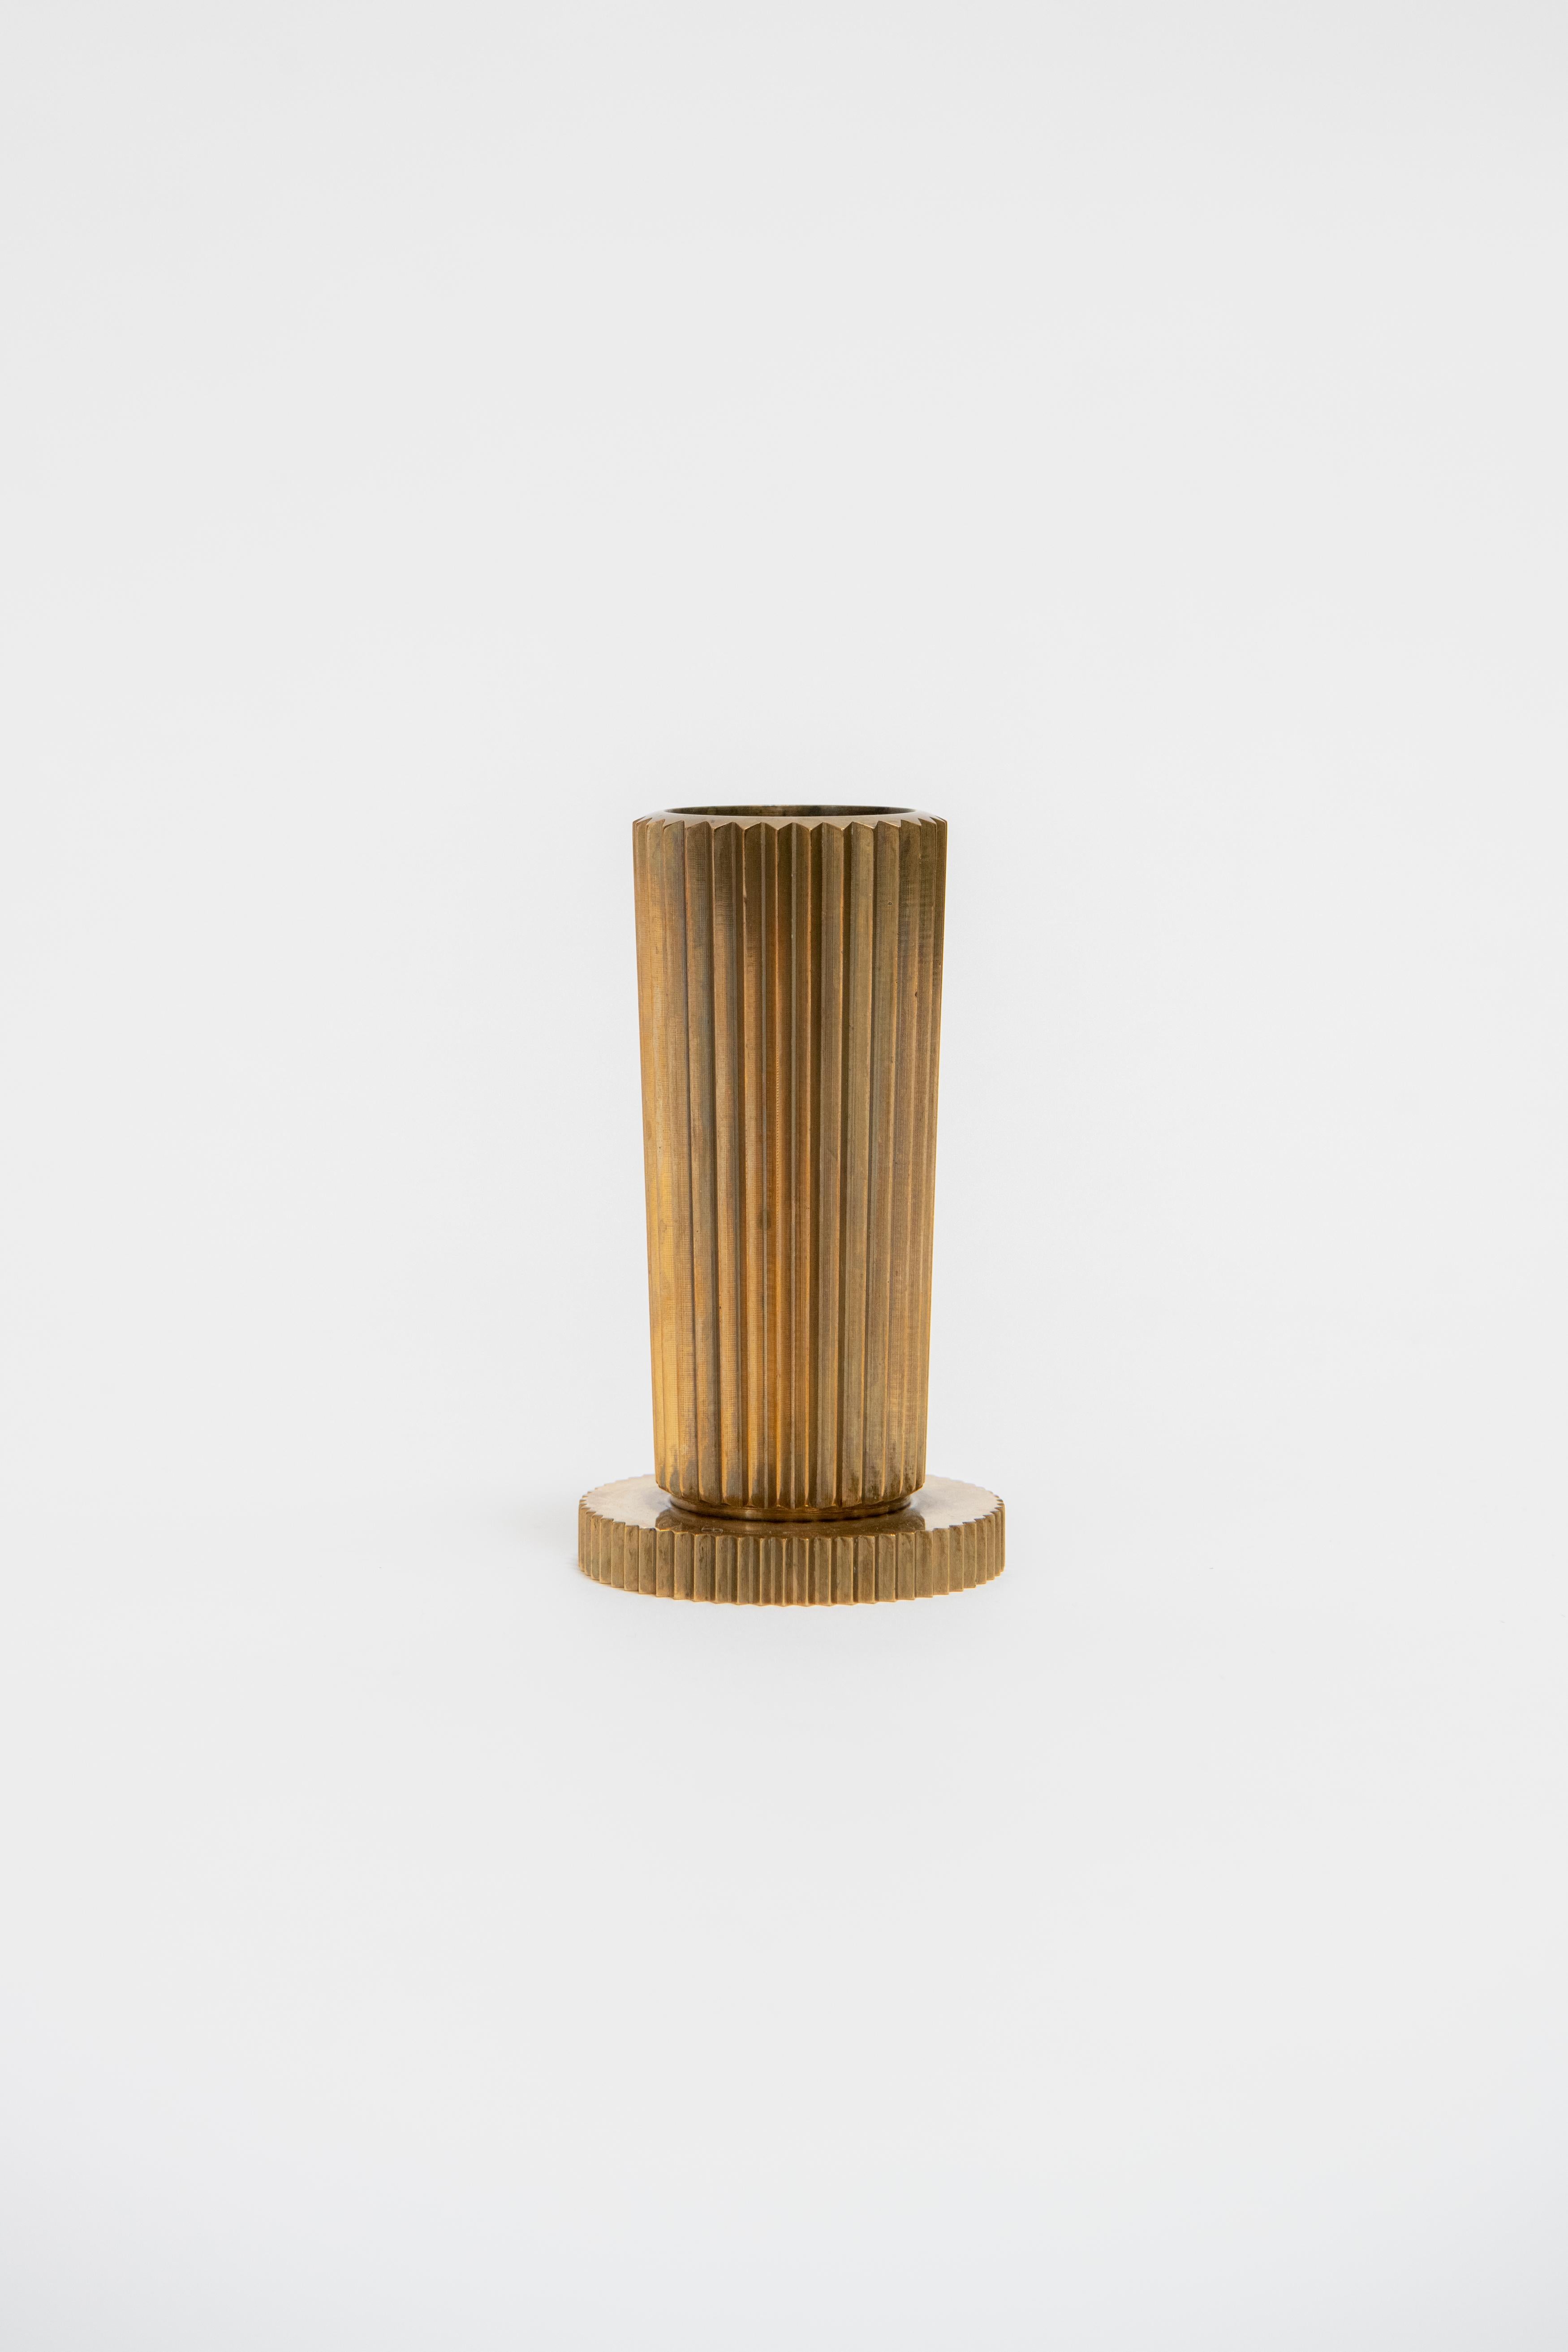 A heavy, solid bronze vase with fluted edges in a machinist style, also reminiscent of an ancient Greek ionic column. Produced by Tinos Bronce Denmark circa 1940. Marked “Tinos Bronce